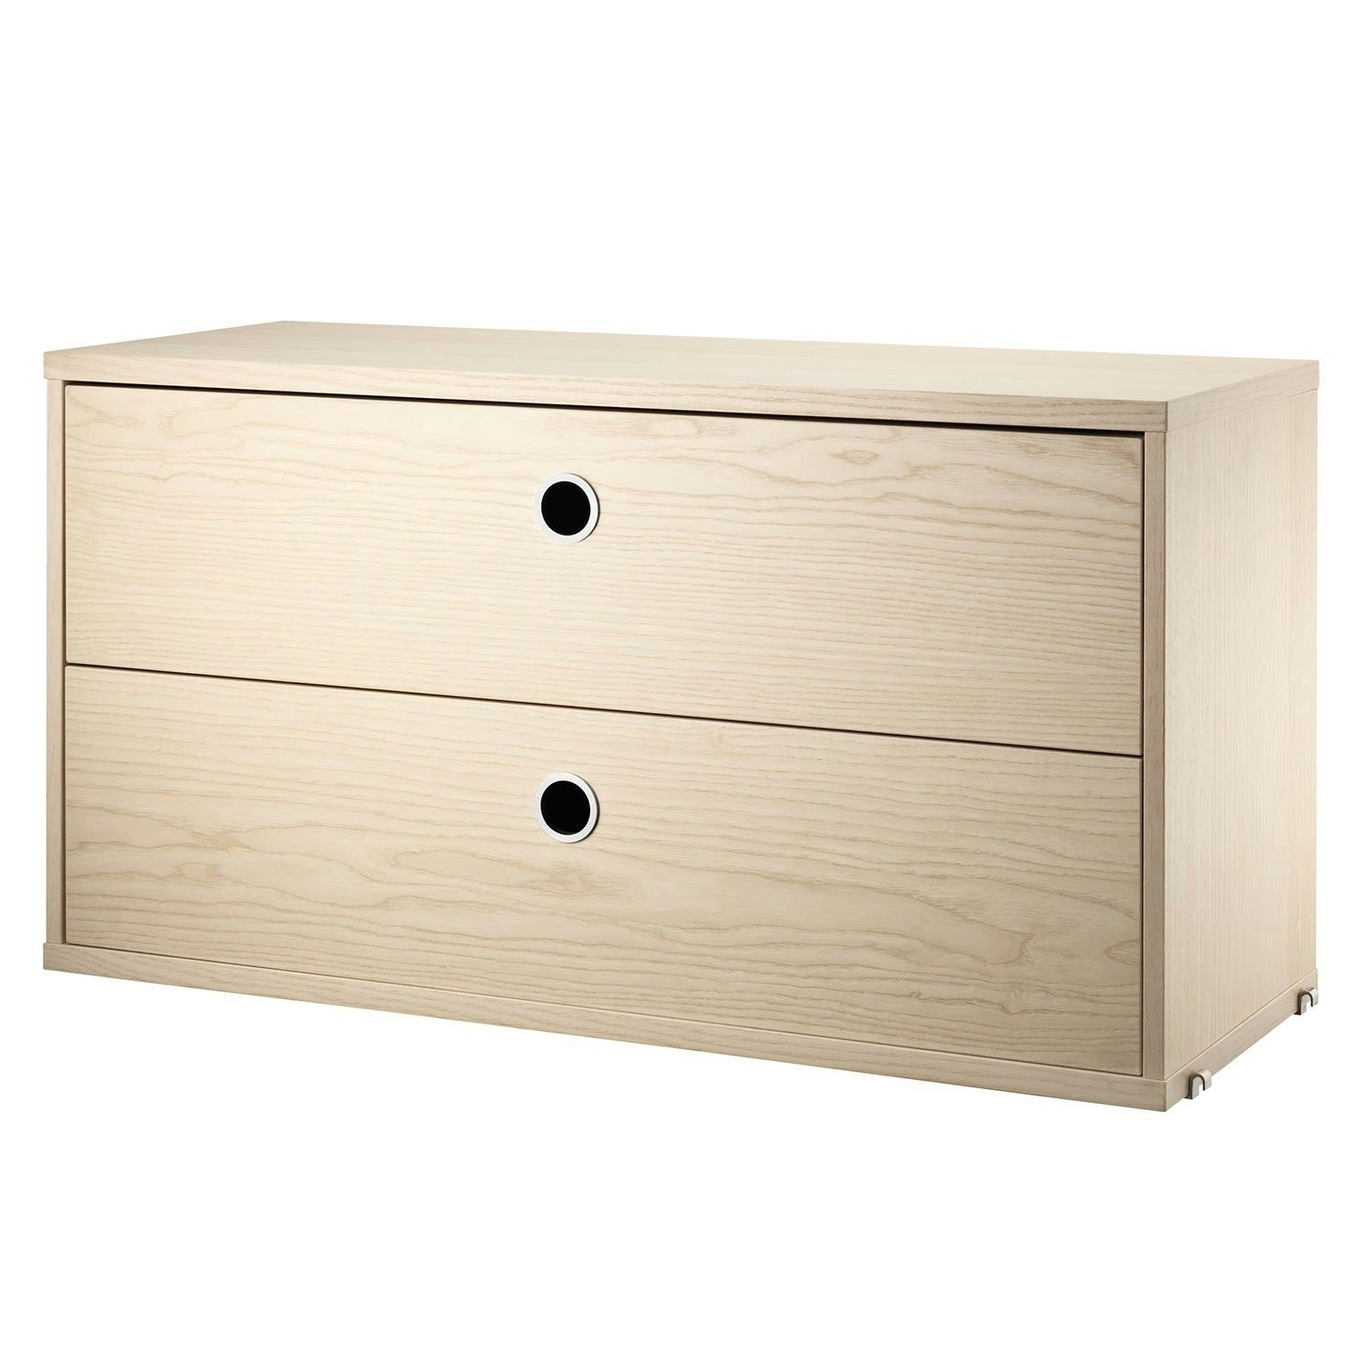 String Chest Of Drawers 78x30 cm, Ash